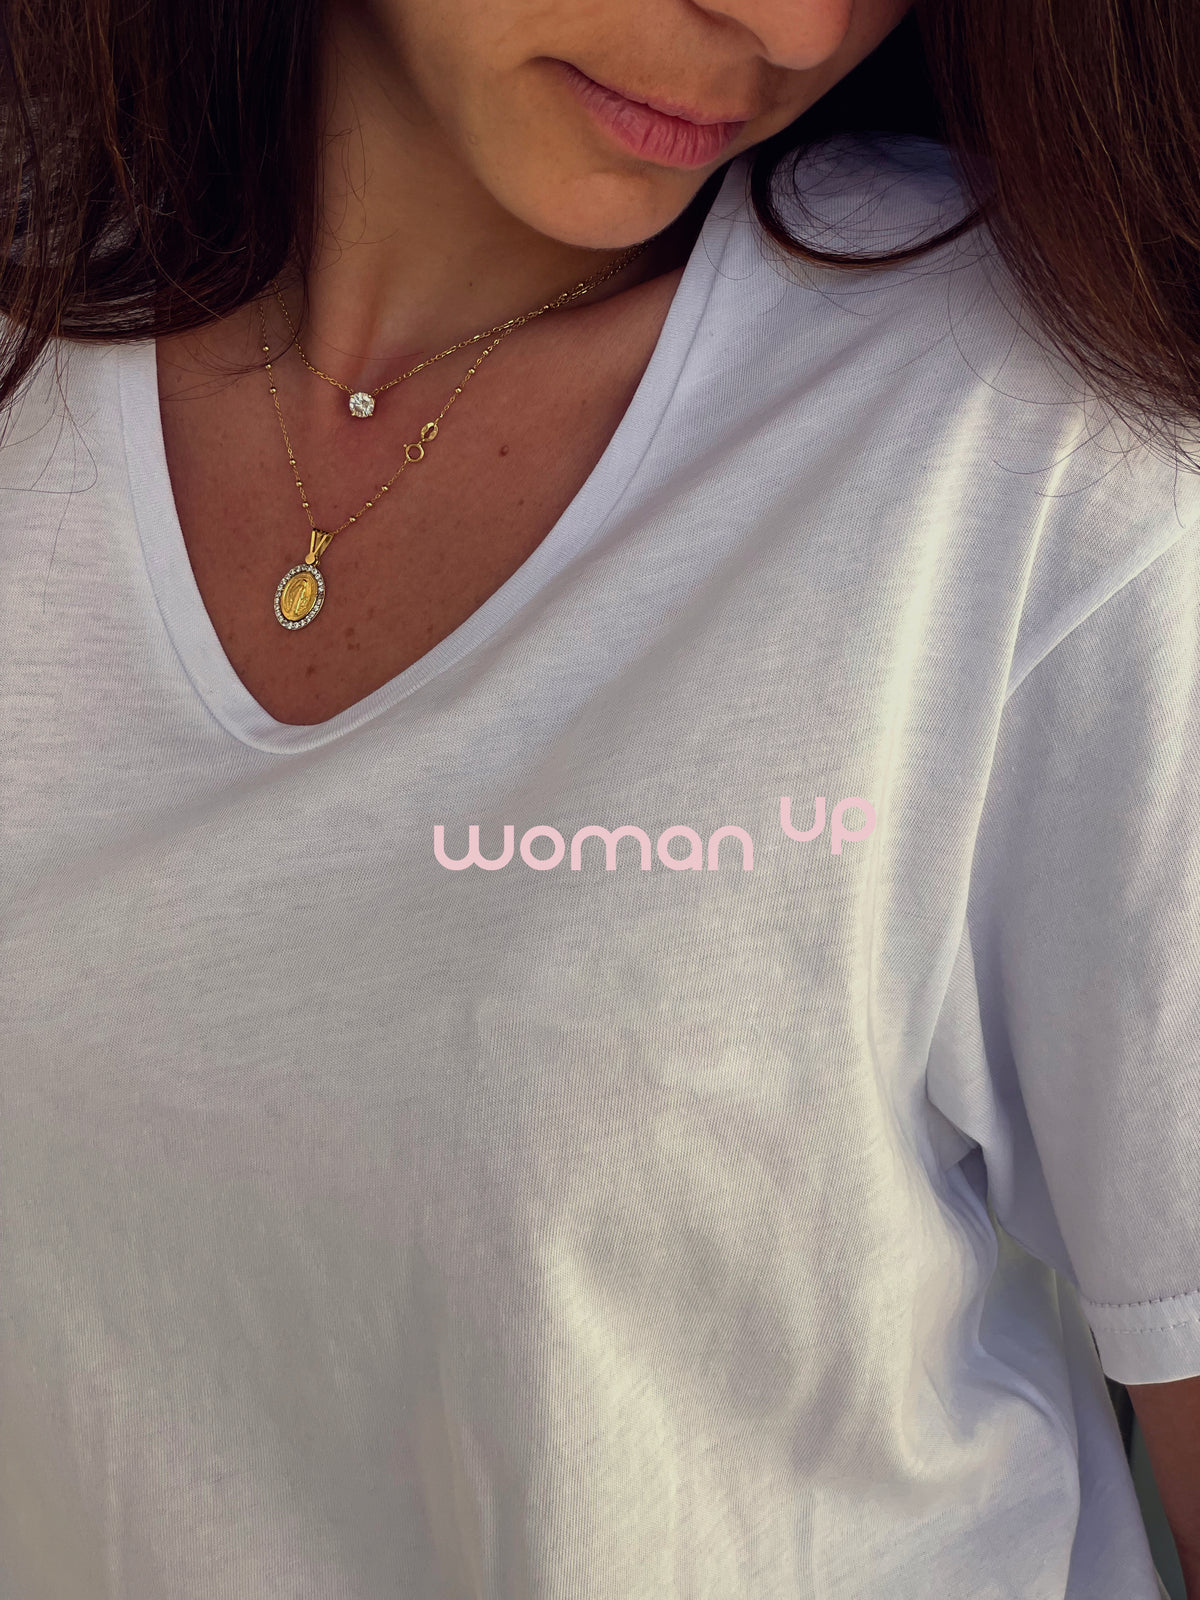 The Woman Up T-Shirt- V Neck